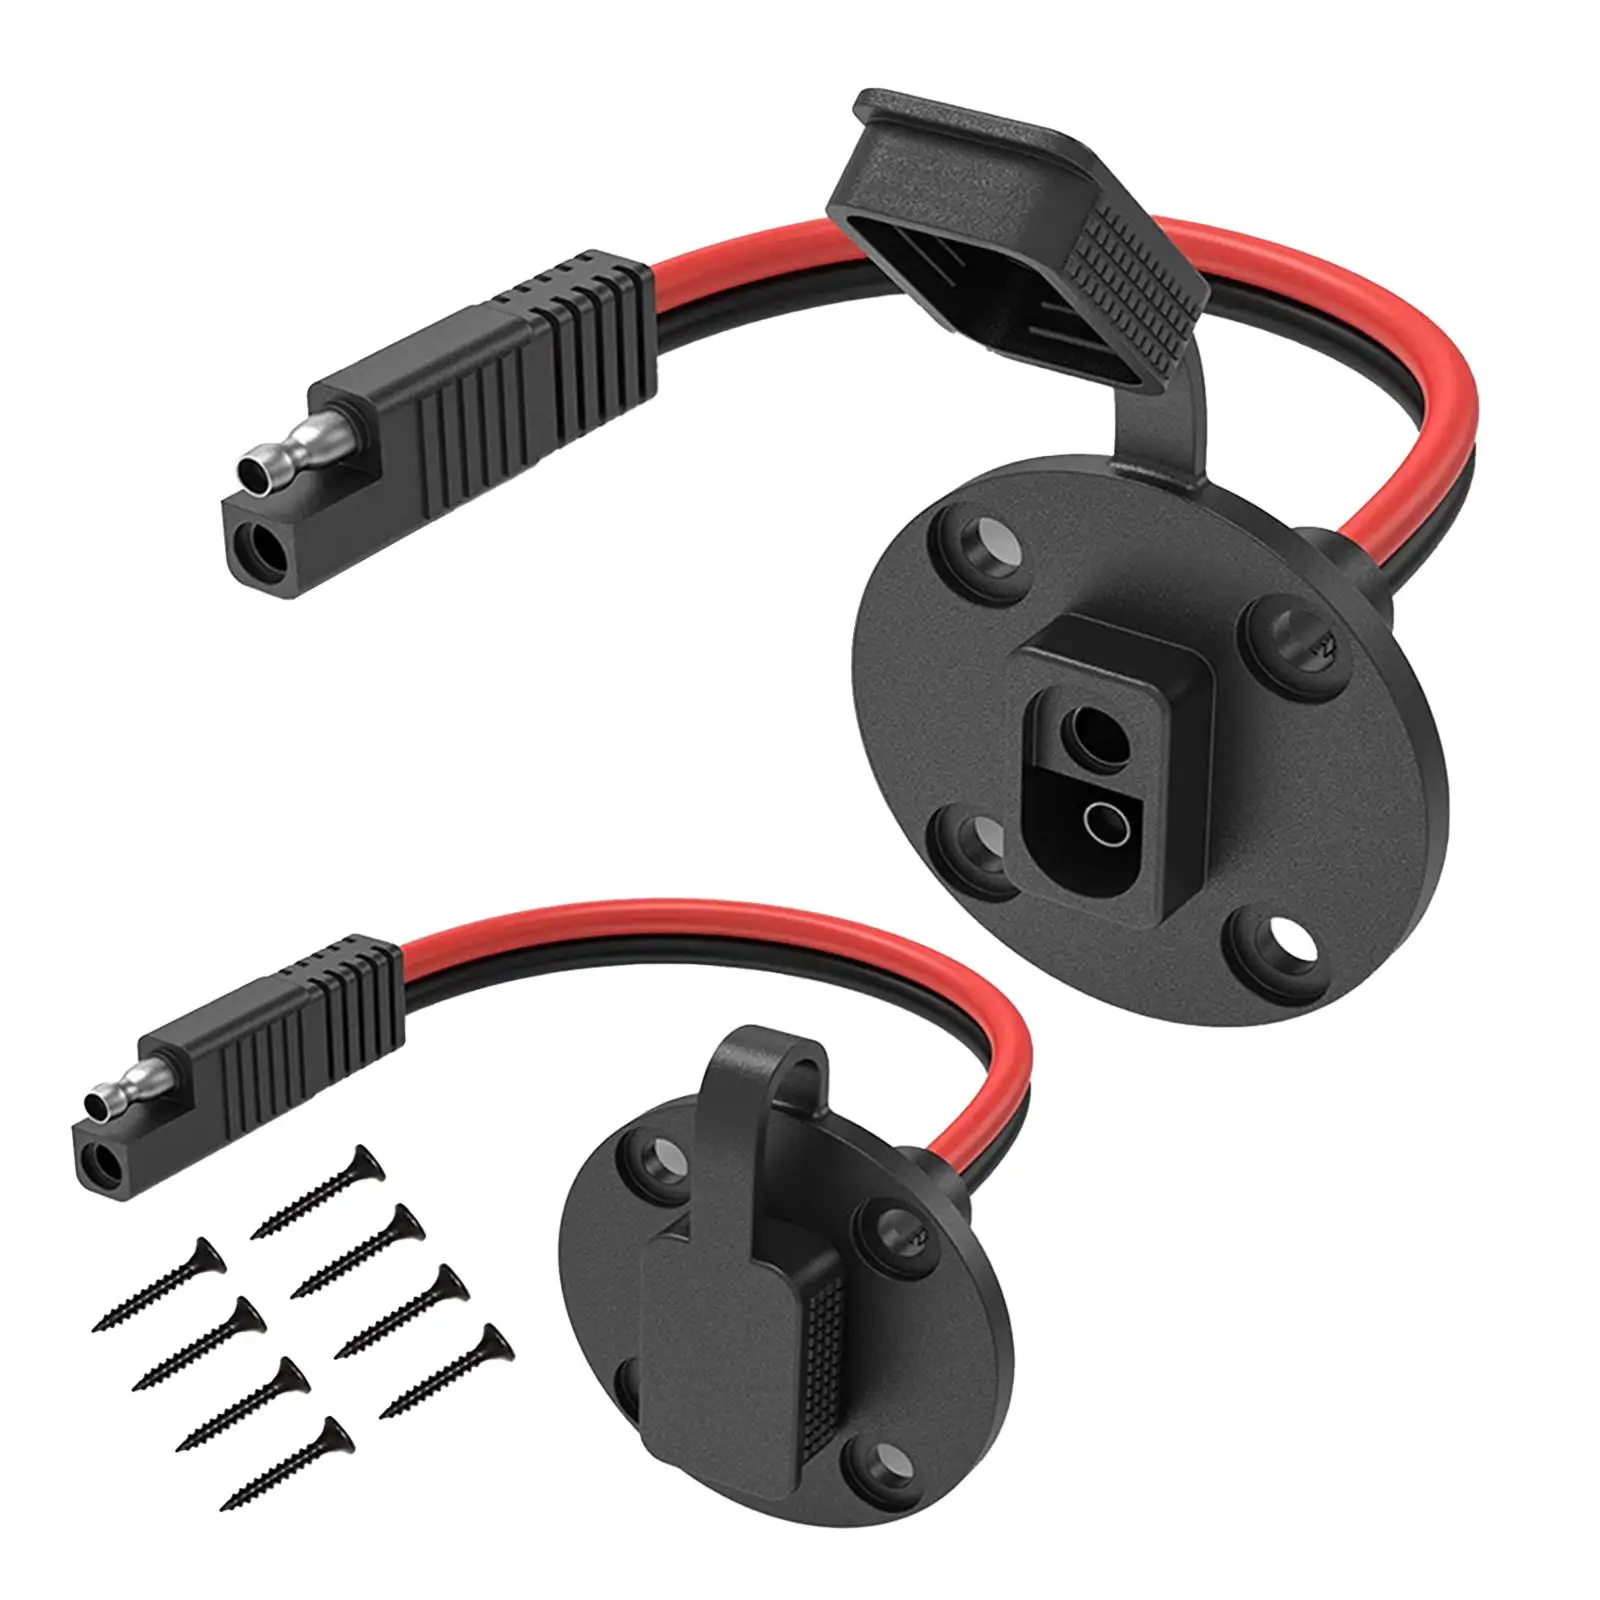 2Pcs SAE Socket 12AWG Accessory Male Plug to Female Socket Cable Harness Quick Connector DC Power Automotive 30A Battery Cables